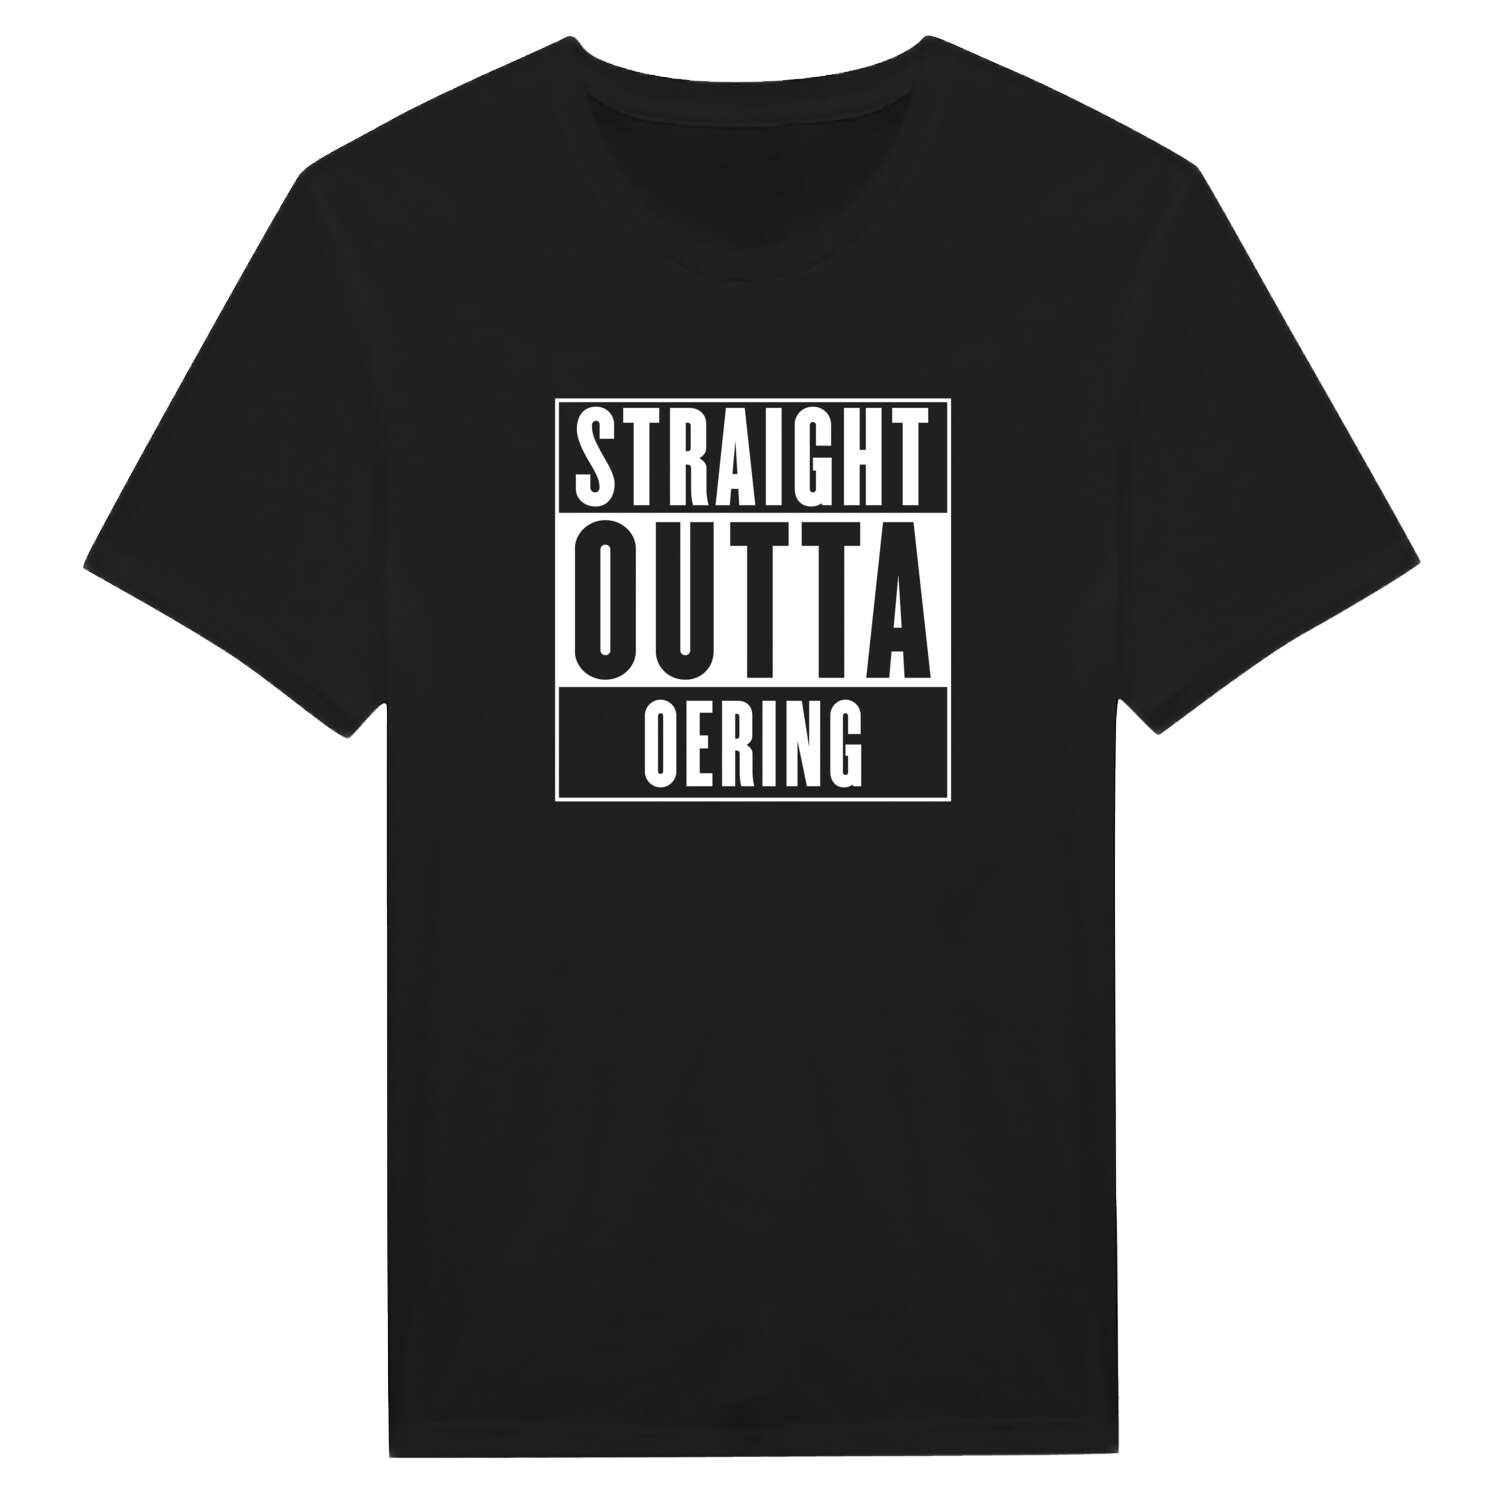 Oering T-Shirt »Straight Outta«